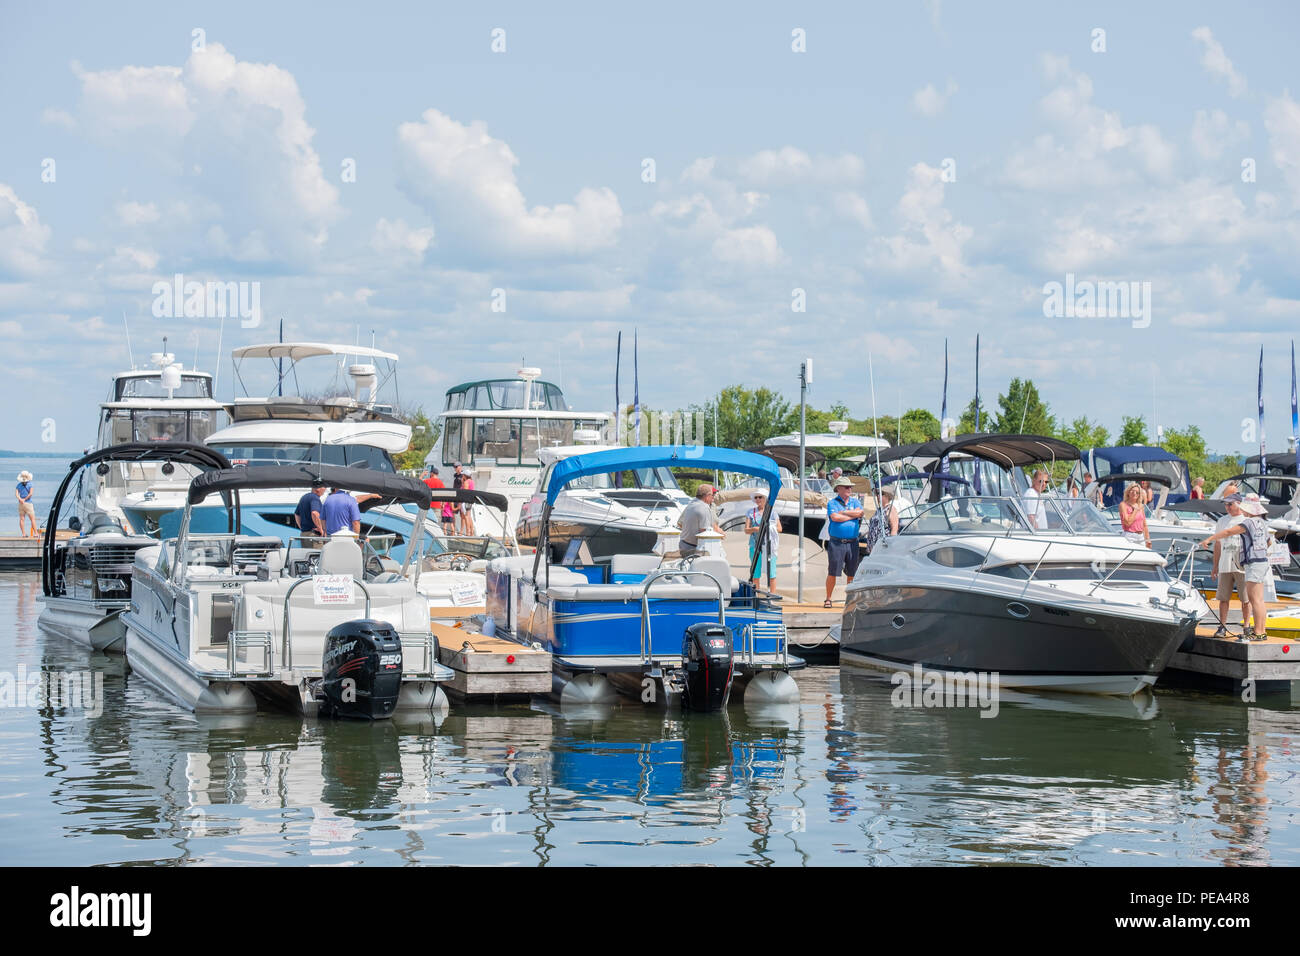 People viewing a number of boats available for sale at the annual Waterfront Festival and Boat Show in Irillia Ontario Canada. Stock Photo